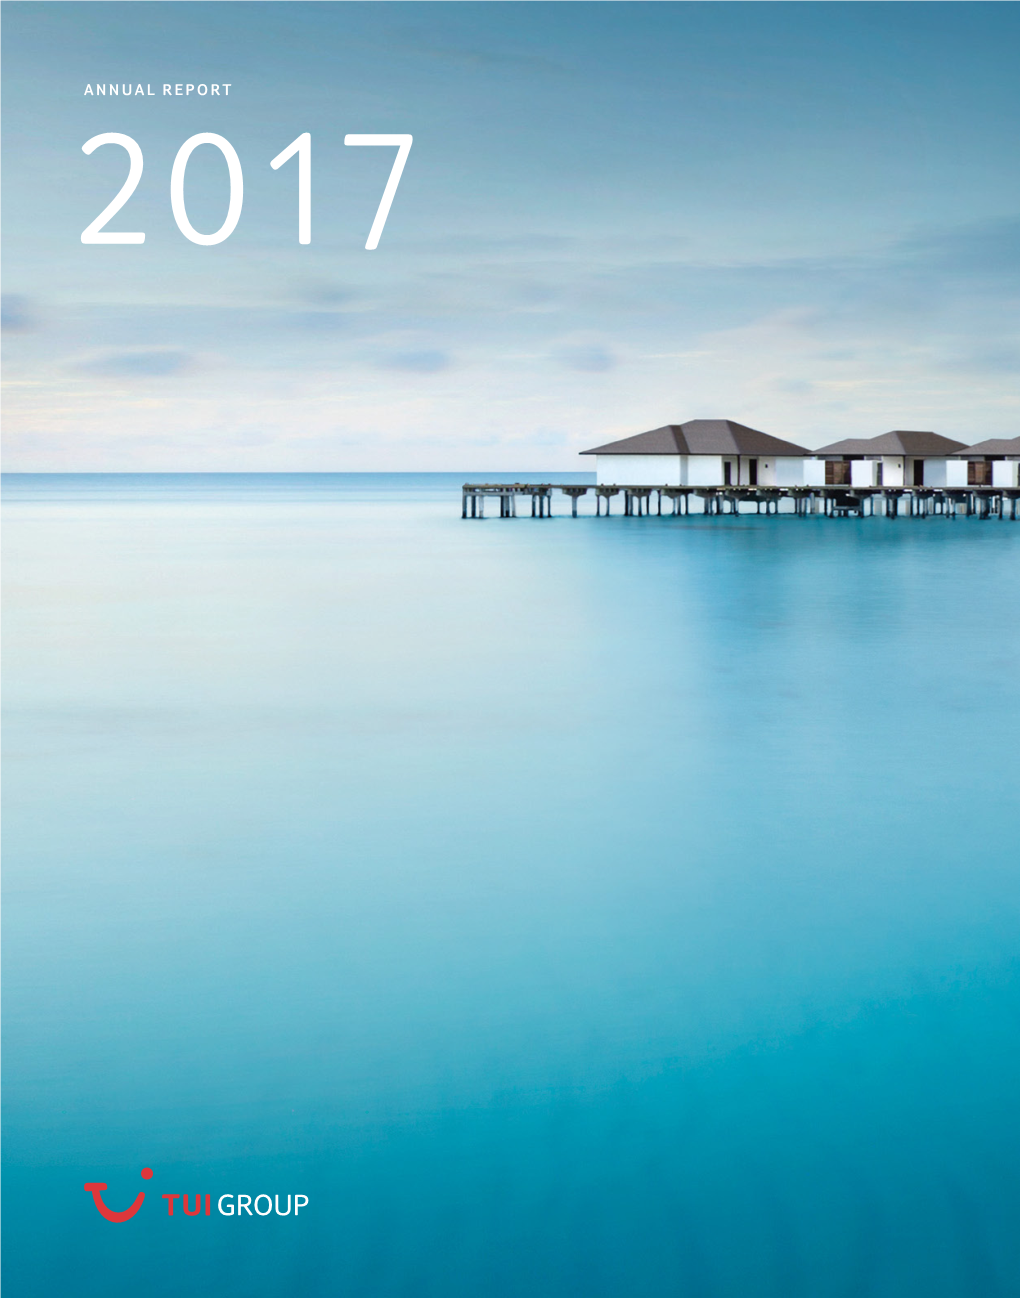 Annual Report 2017 Contents & Financial Highlights